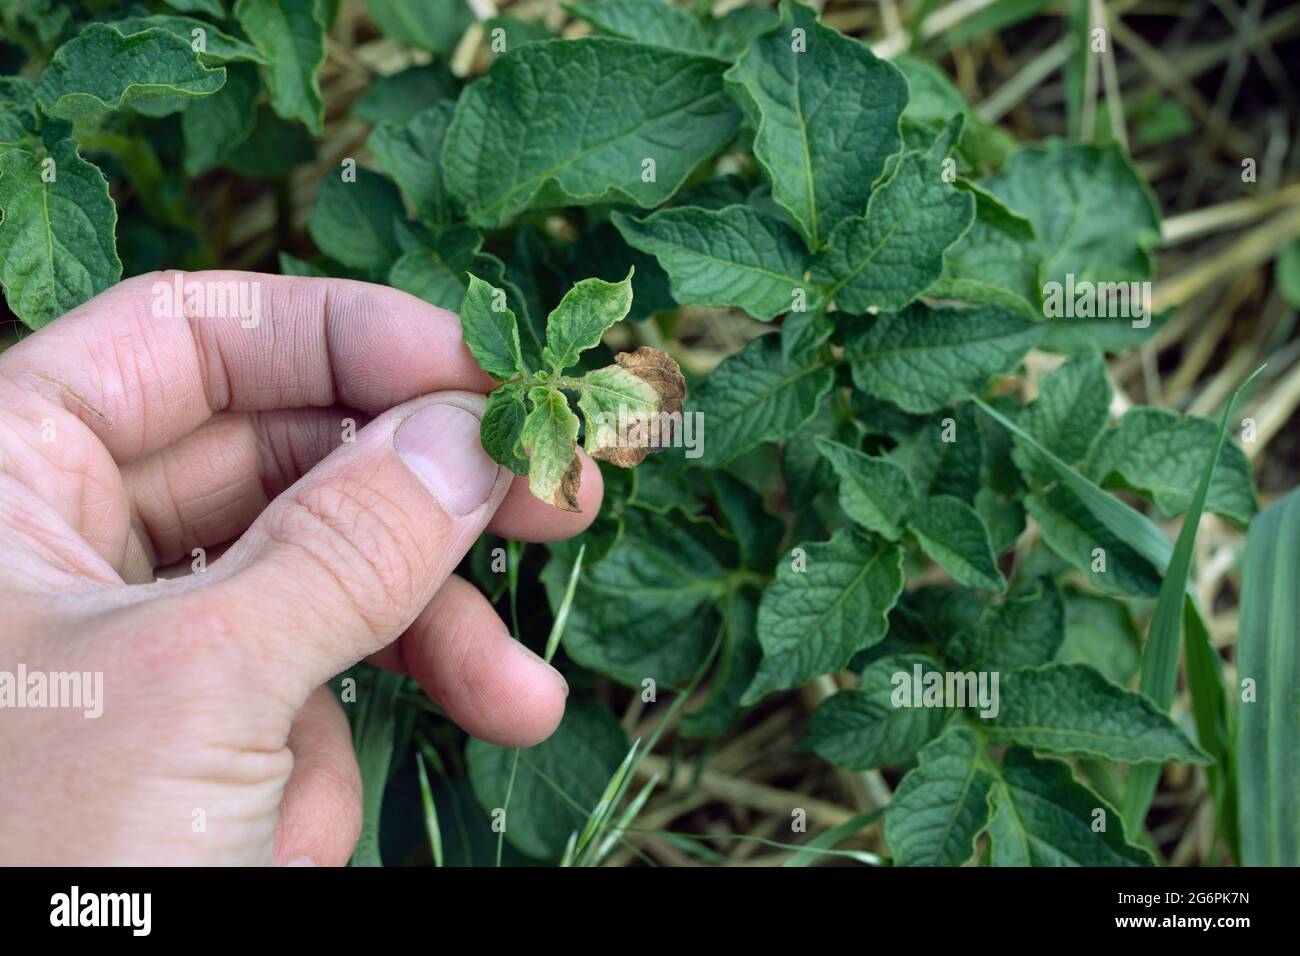 Potato bush with brown and yellow spots on foliage, fungal problem. Phytophthora is disease which causes spotting on Solanaceae family leaves. Stock Photo